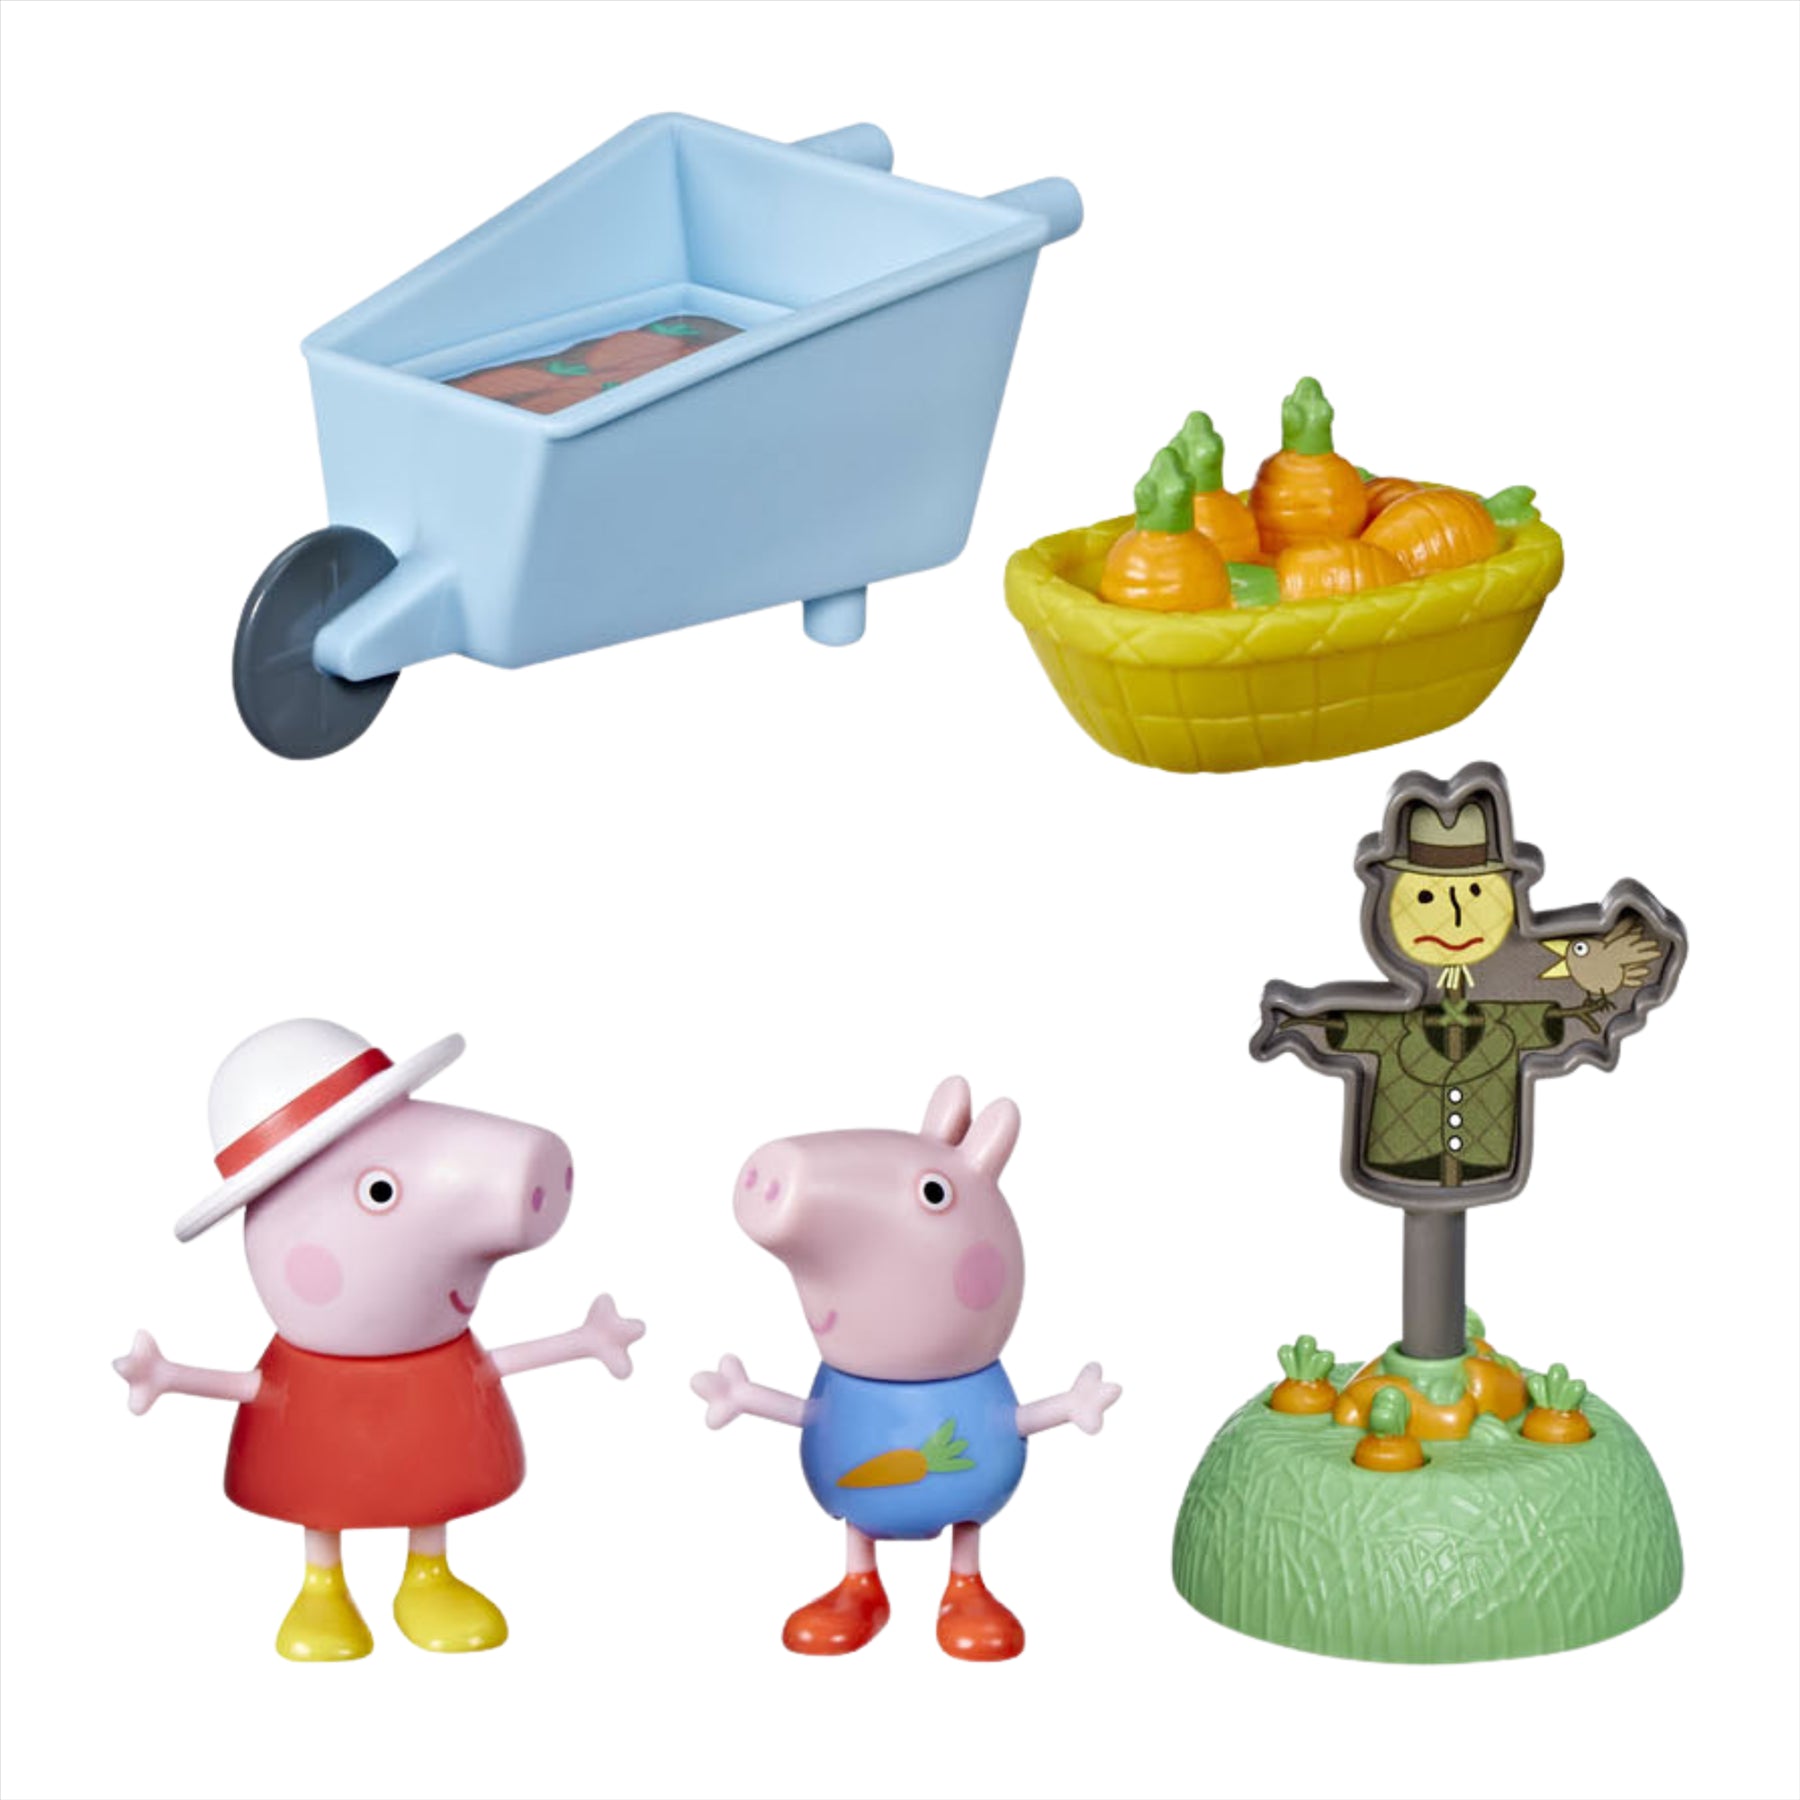 Peppa Pig Peppa's Growing Garden Toy Playset with Figure and Accessories